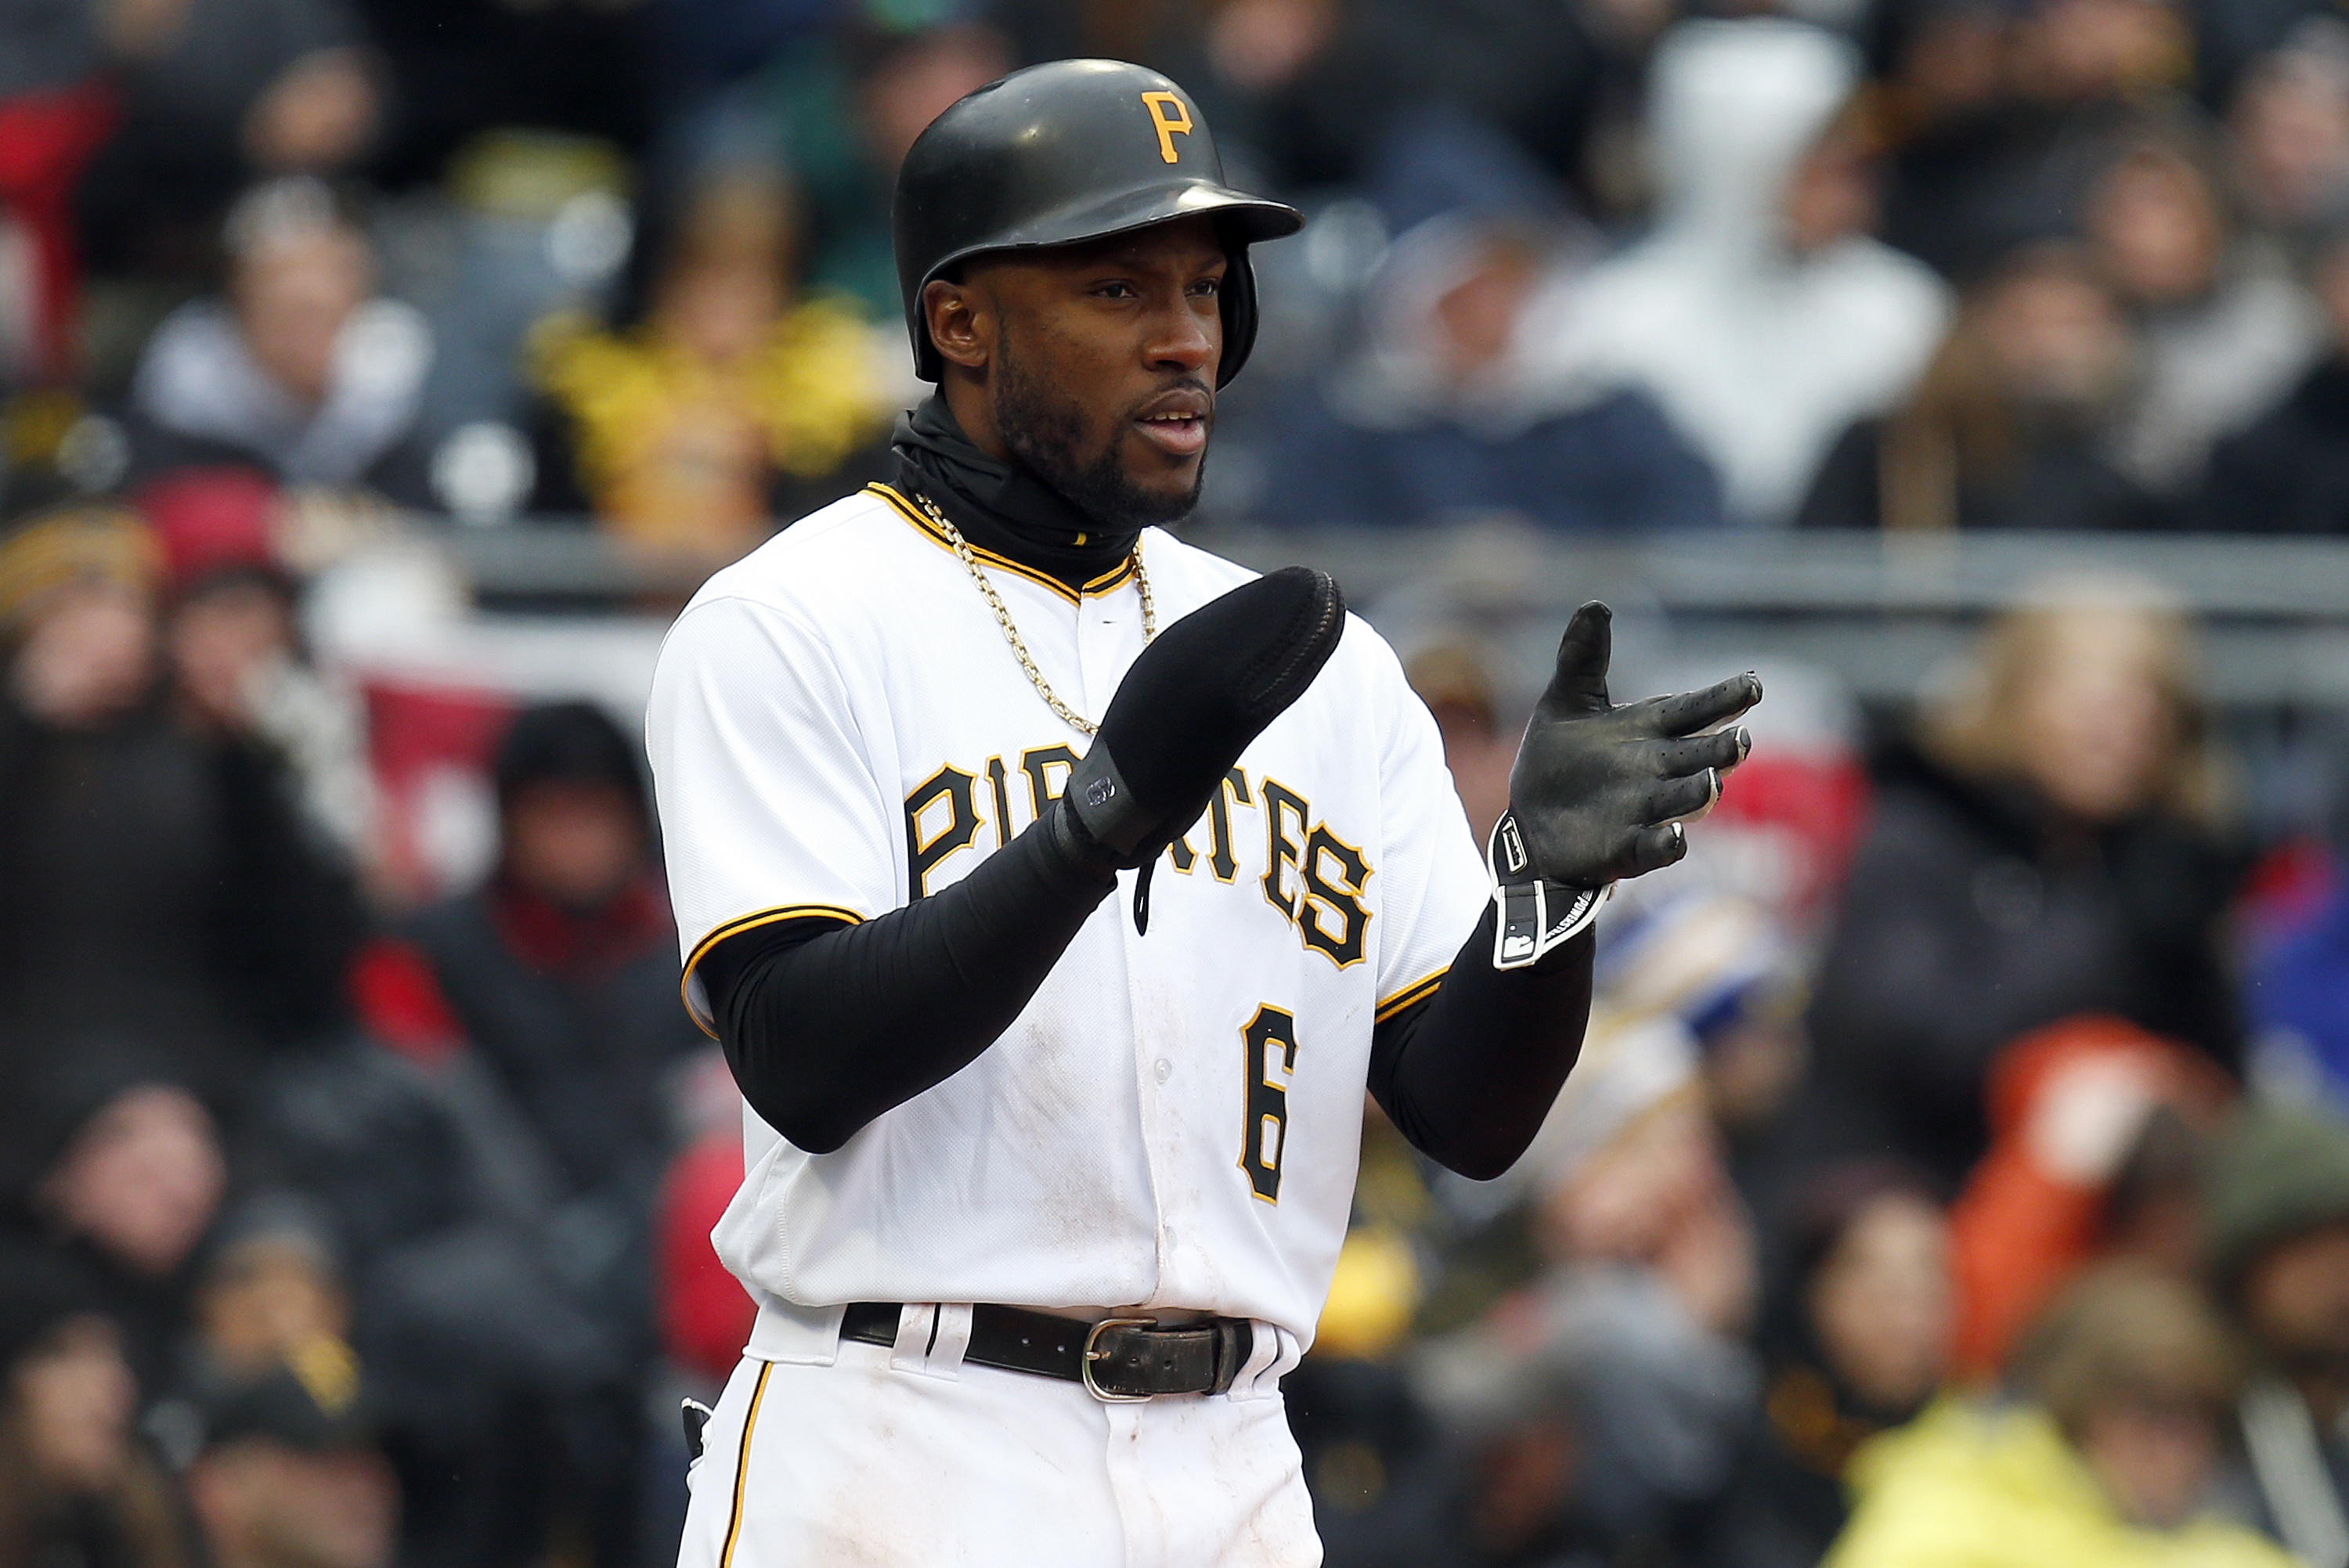 MLB report: Pirates OF Starling Marte banned 80 games for PEDs